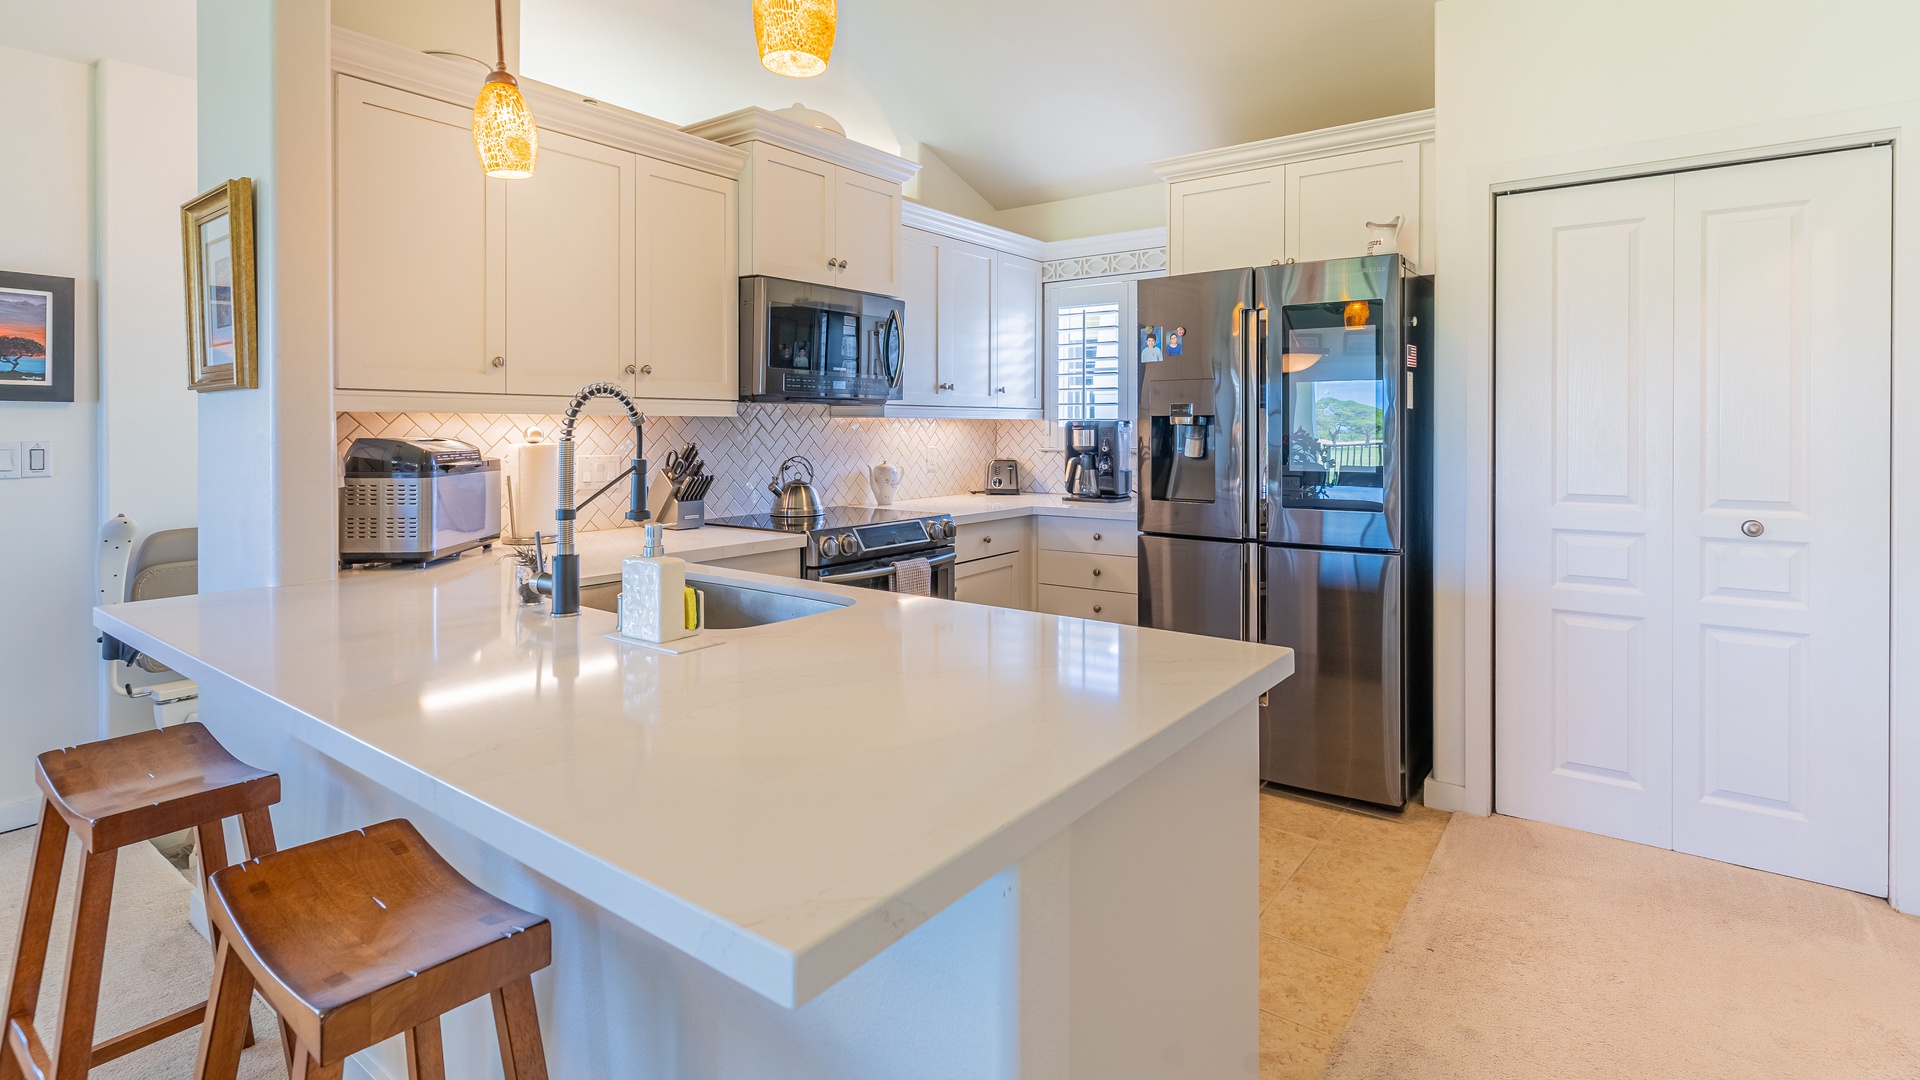 Kapolei Vacation Rentals, Kai Lani 20C - The open floor plan in the kitchen and beautiful lighting is the heart of the home.